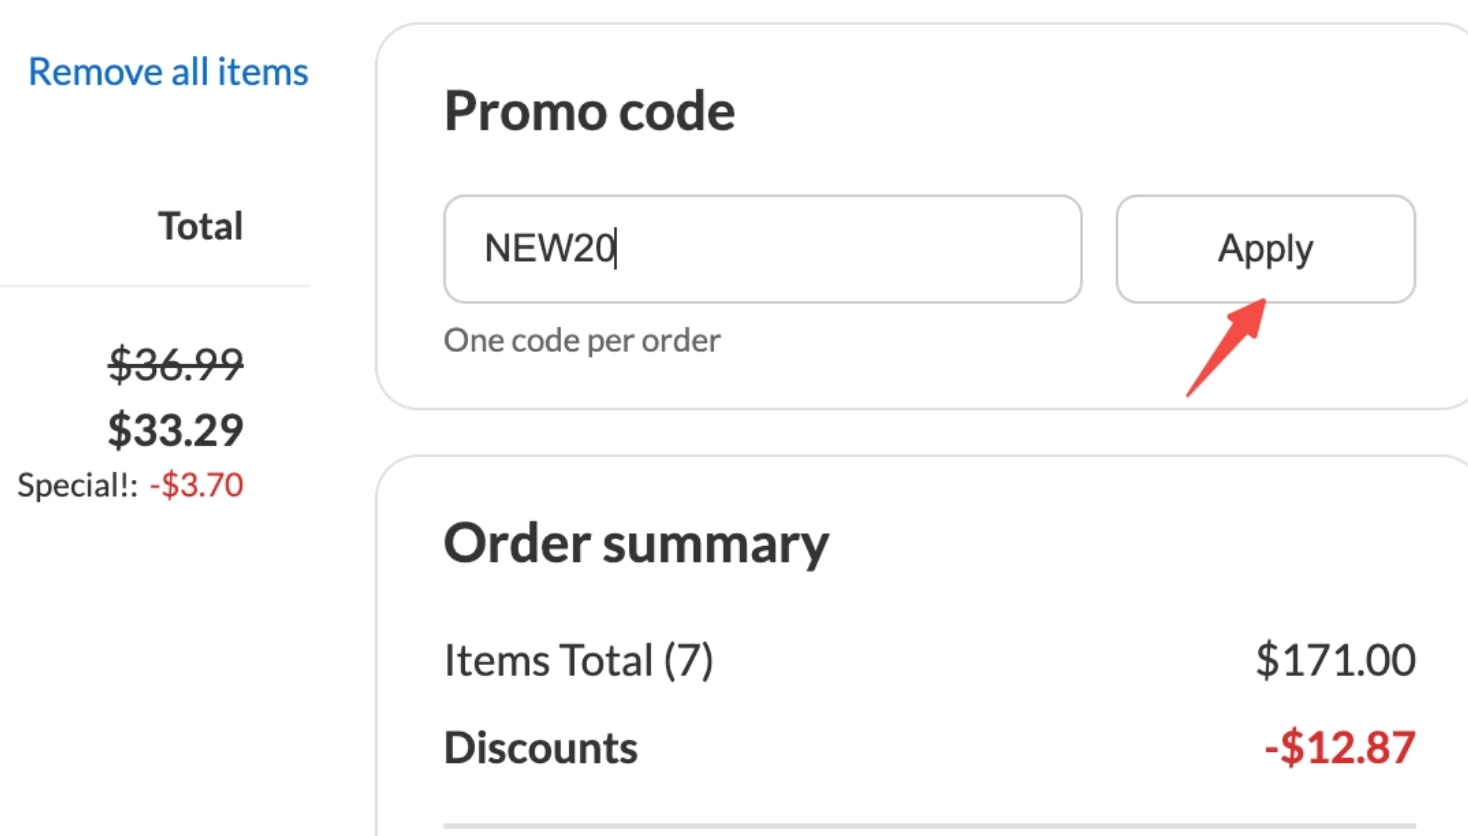 Step 3: When checking out at maniacsonline.com.au, paste the discount code into the specified promotional code box.